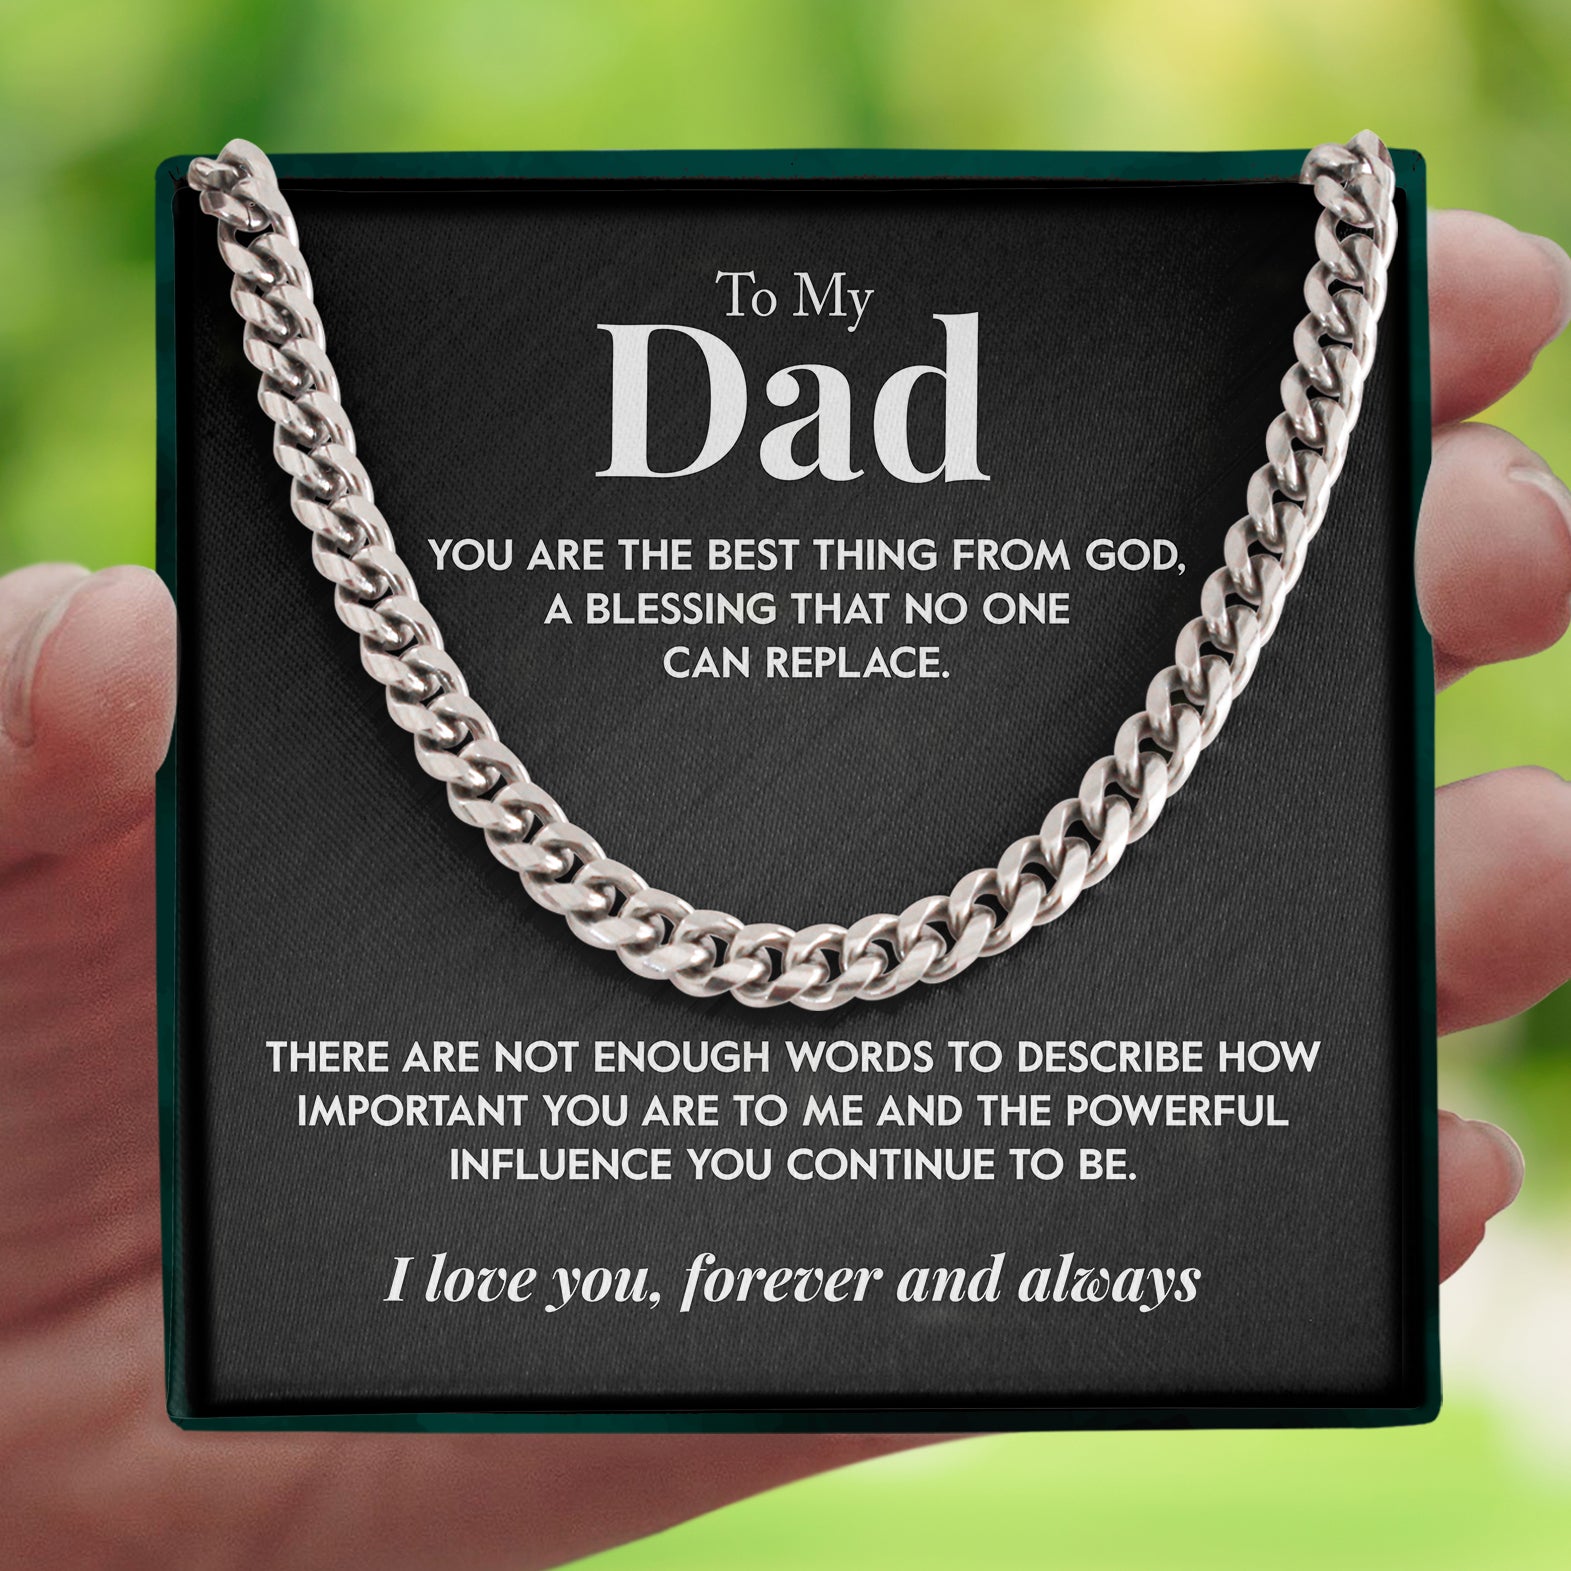 To My Dad | "Powerful Influence" | Cuban Chain Link